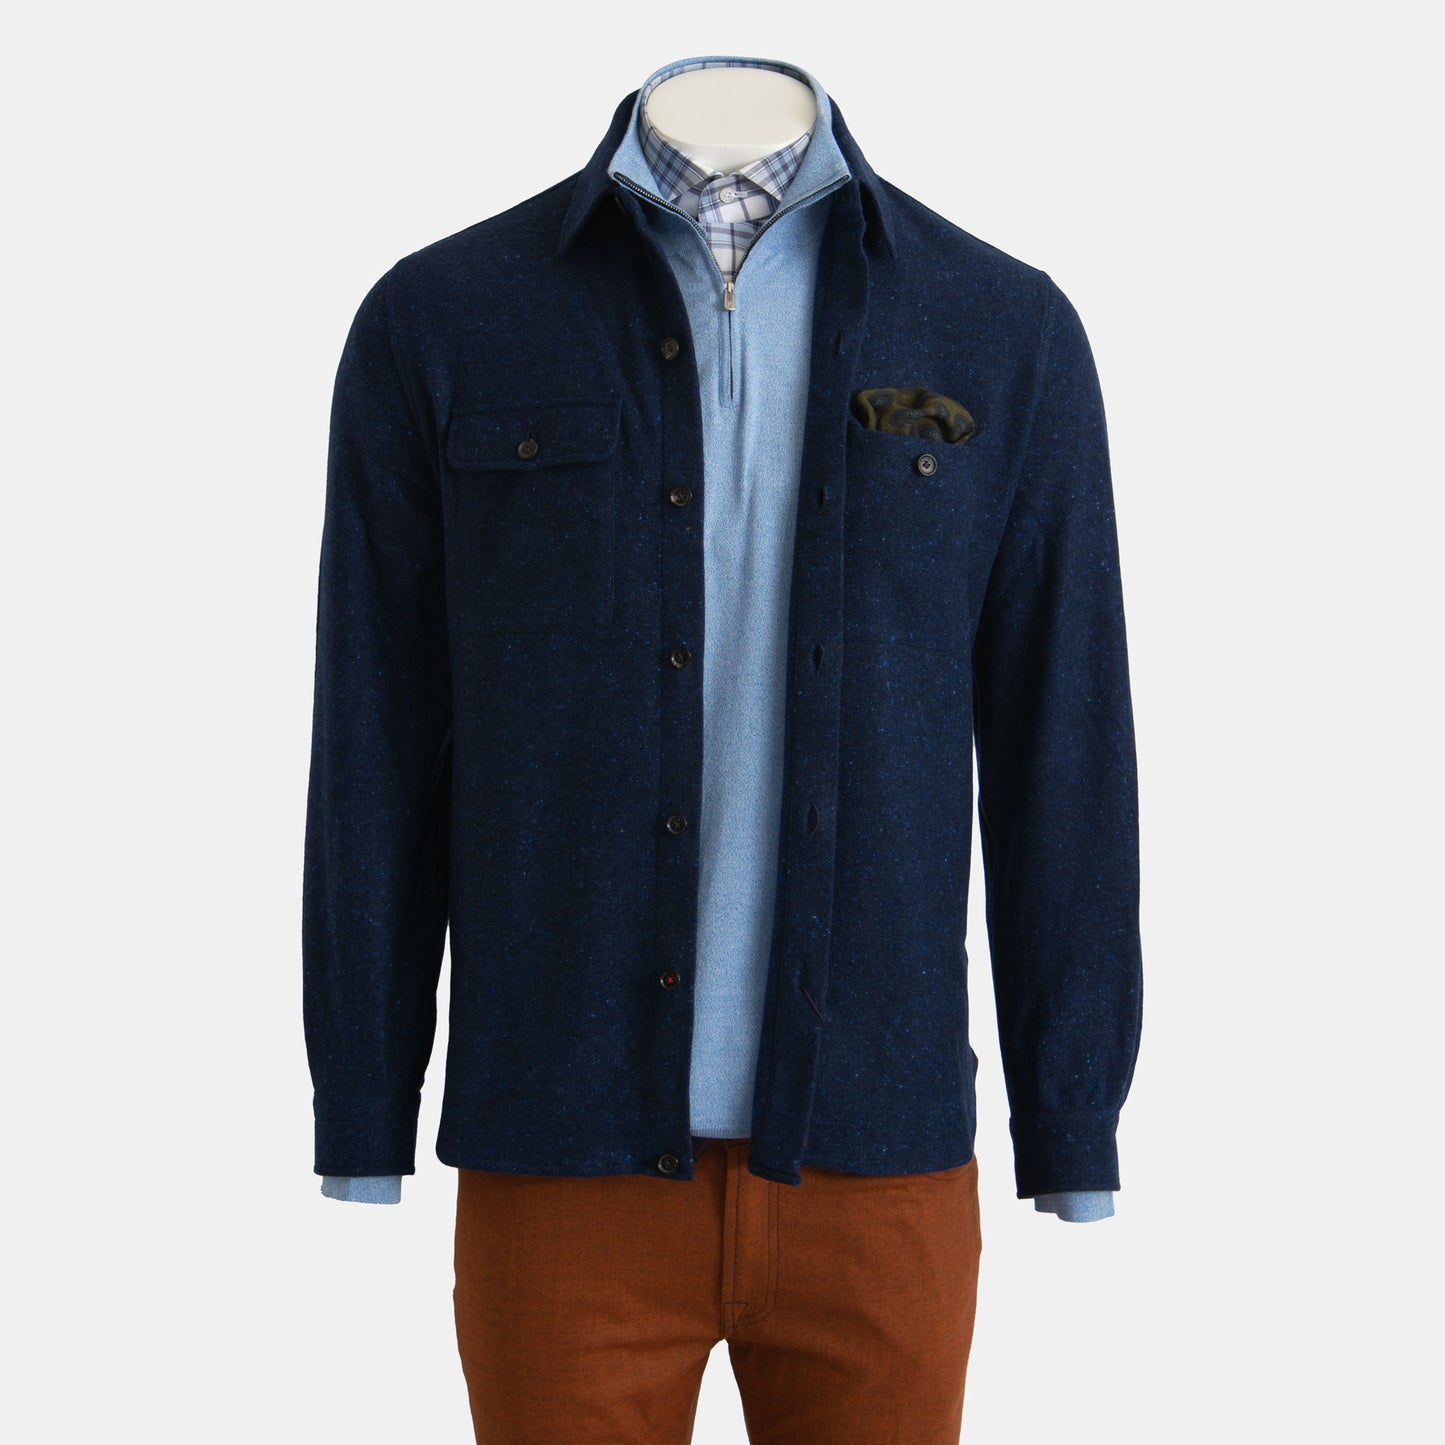 Isaia - Cashmere Silk Blend Donegal Overshirt Jacket in Navy